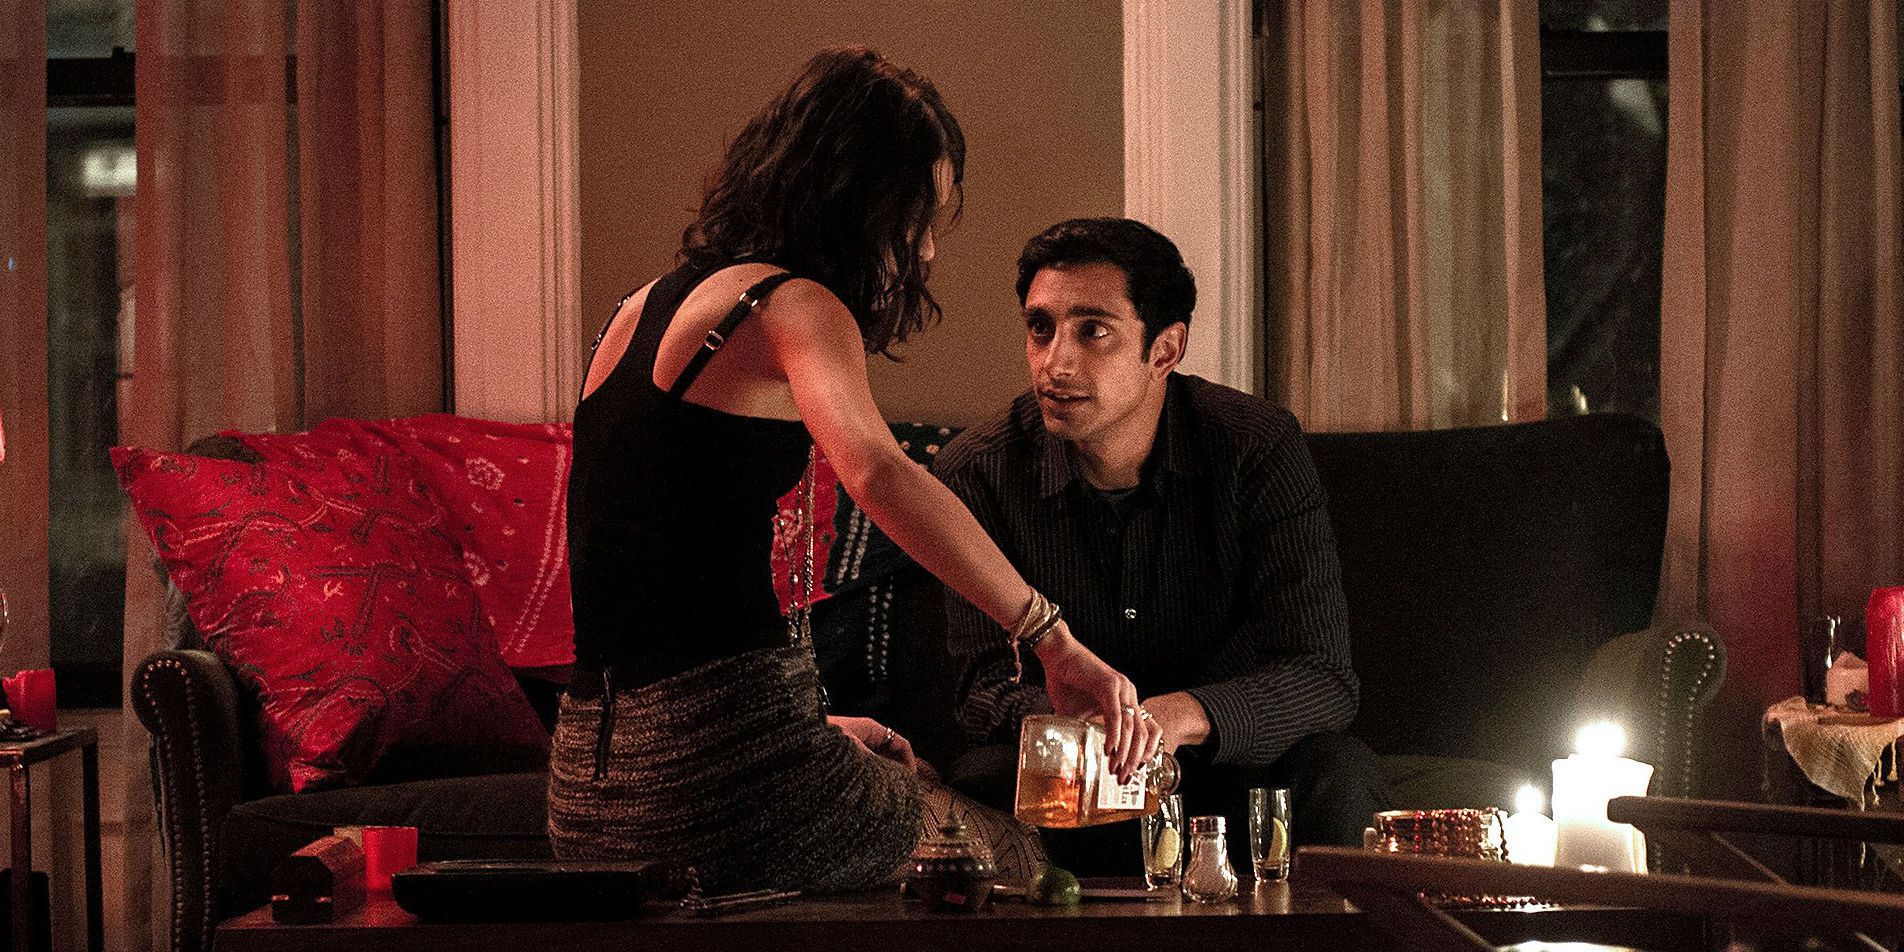 Riz Ahmed as Nasir &quot;Naz&quot; Khan and Sofia Black-D'Elia as Andrea Cornish in HBO's The Night Of